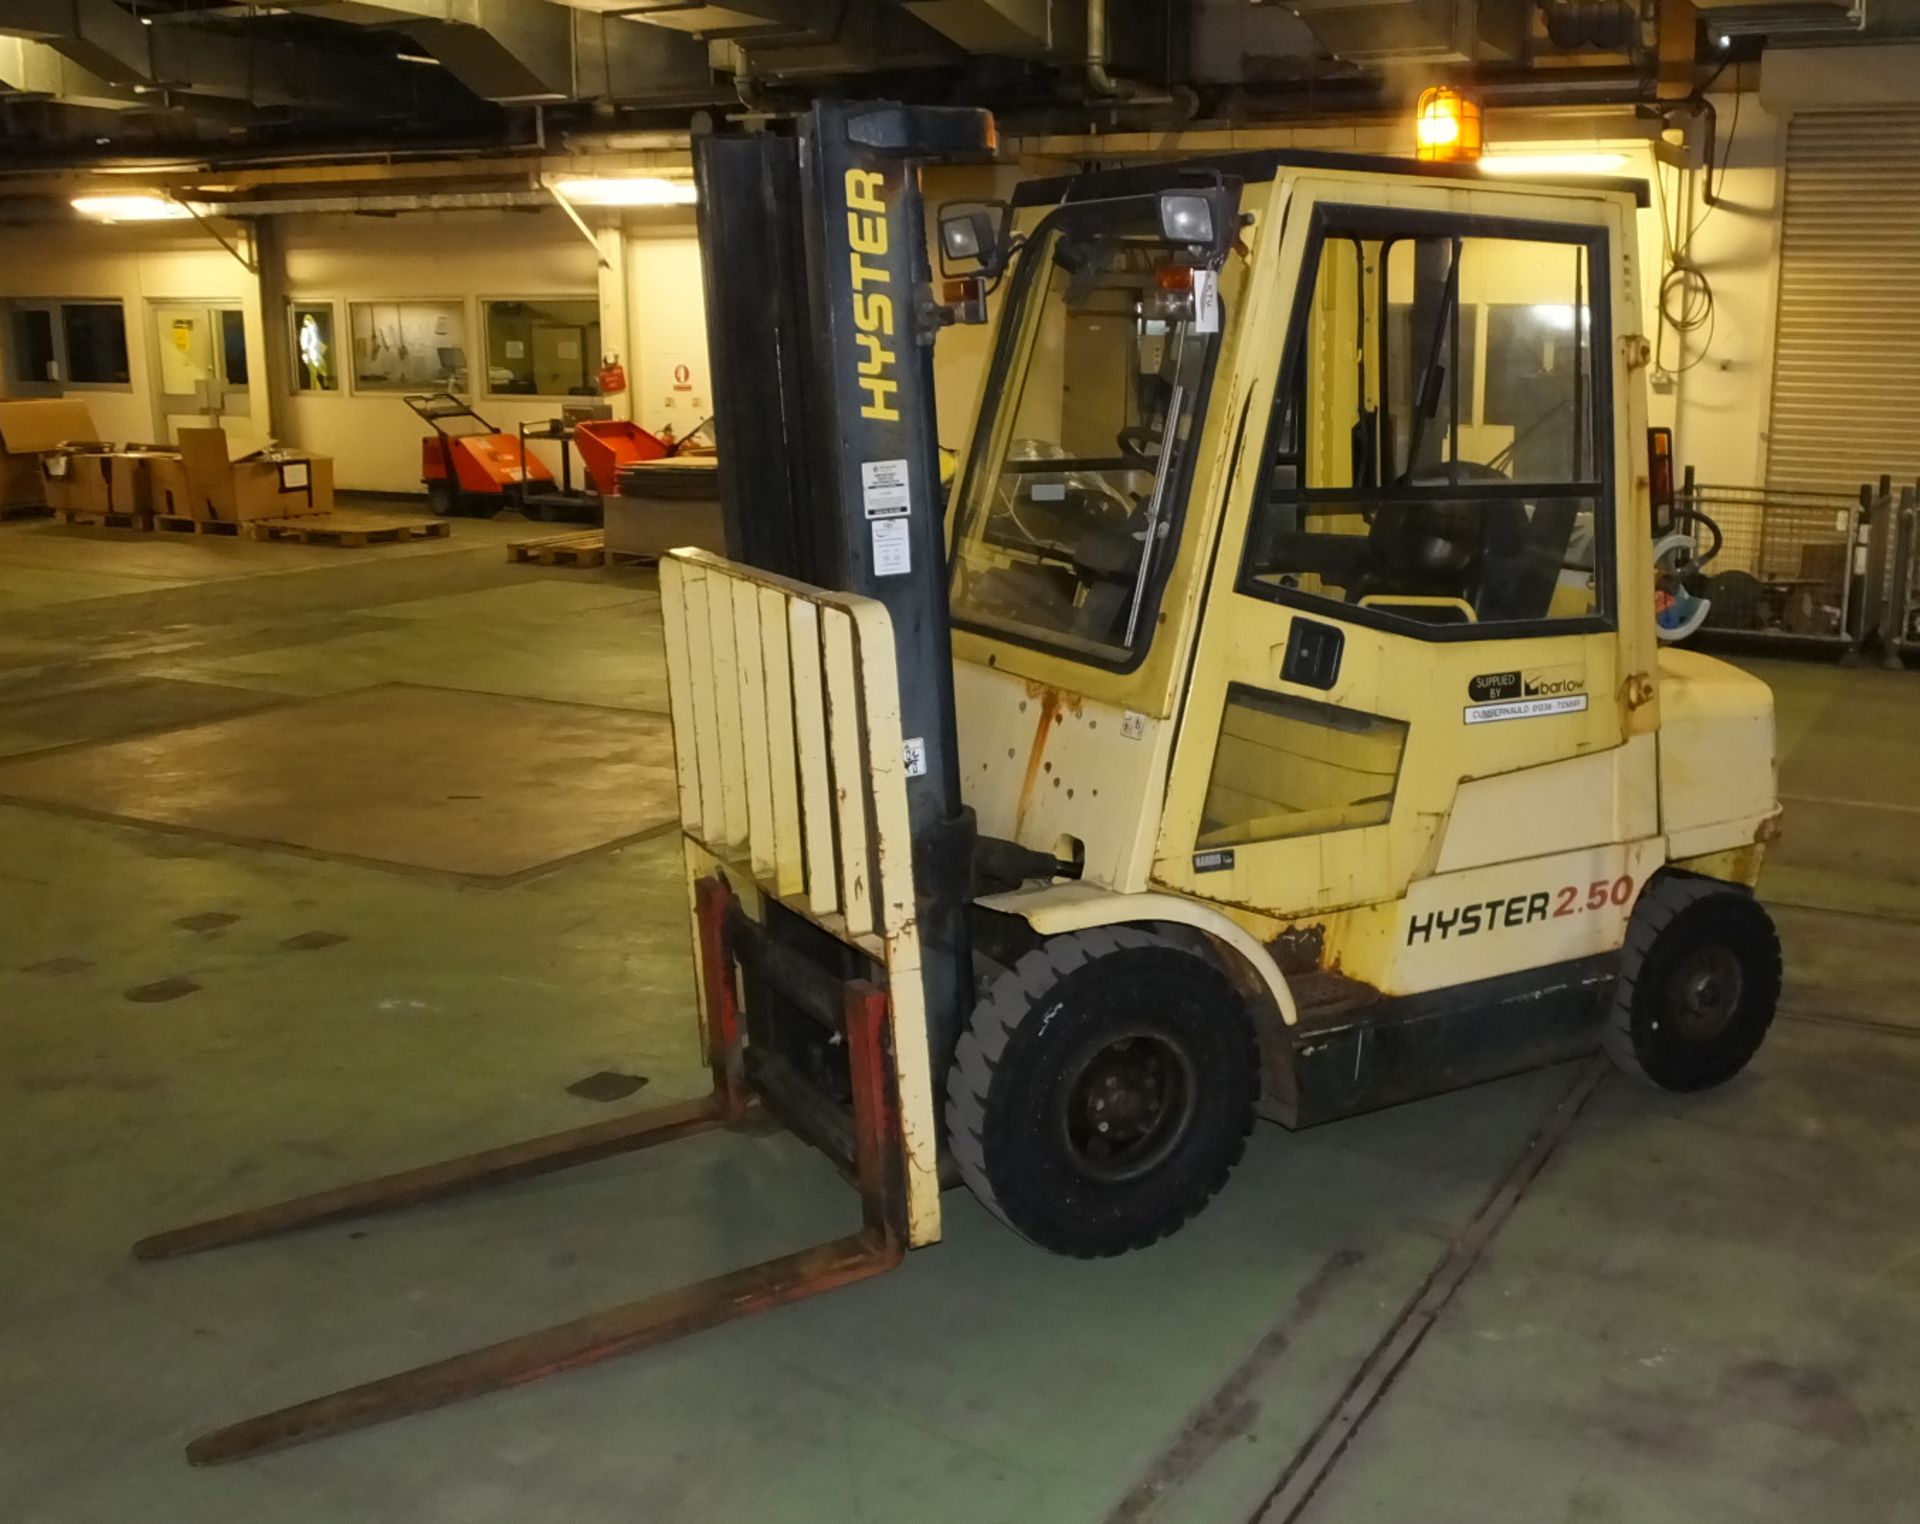 Gas Powered Counterbalance forklift - Hyster H2.50XM - 1999 - SWL 250 - New LOLER Certificate - Image 2 of 23